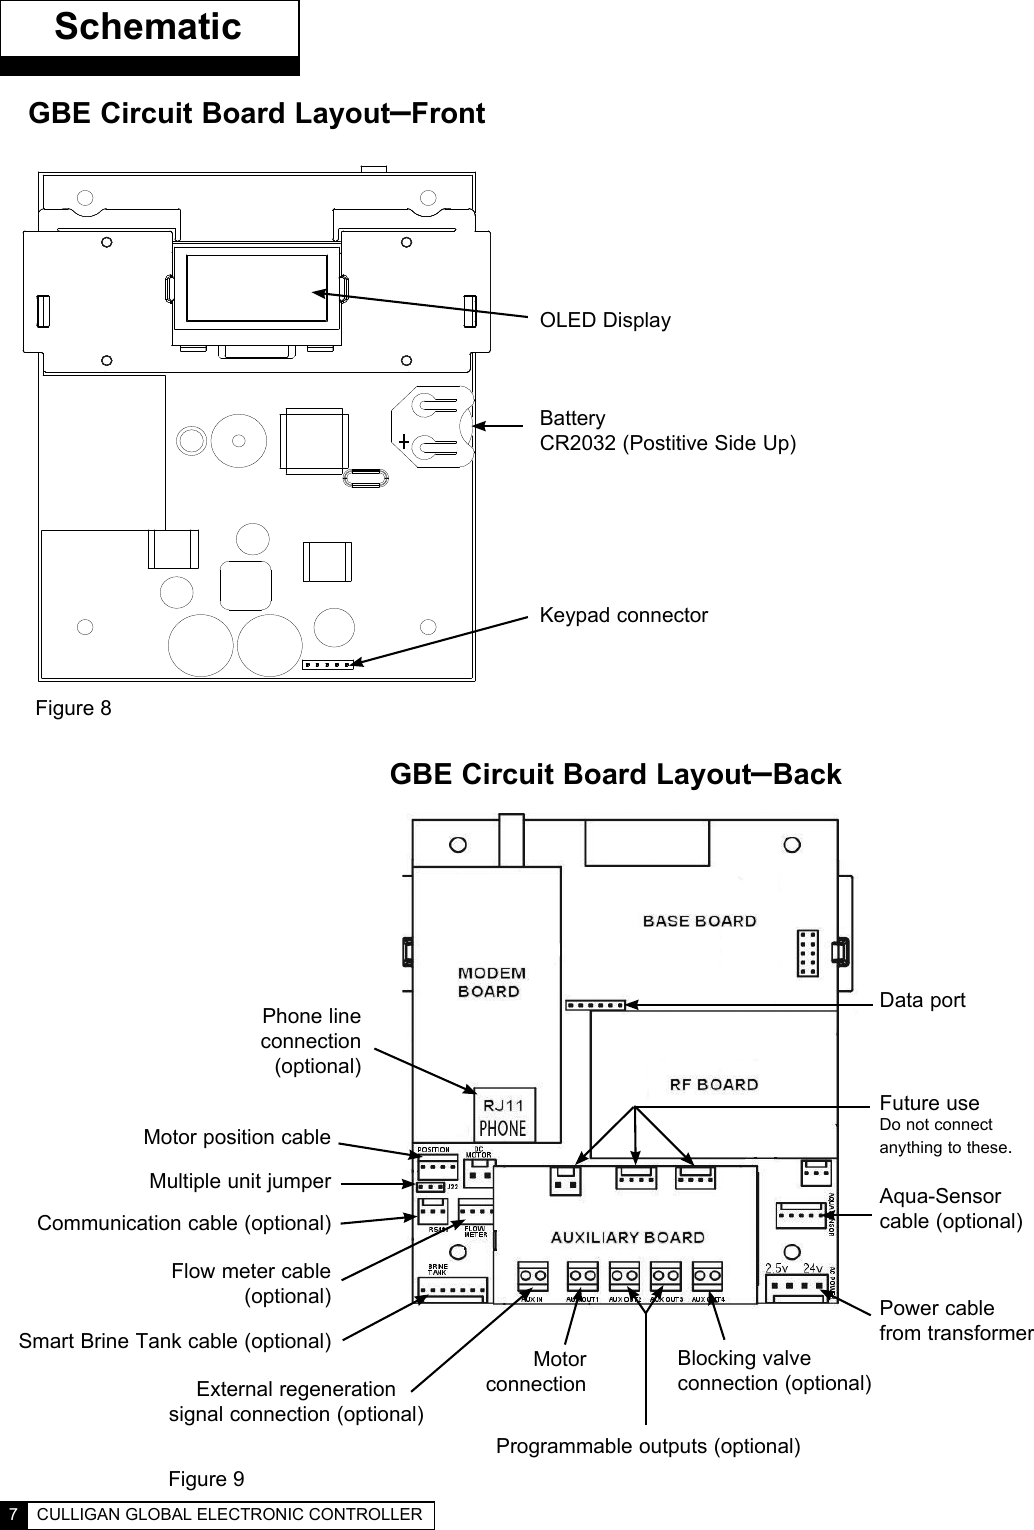 GBE Circuit Board Layout–FrontKeypad connectorBatteryCR2032 (Postitive Side Up)SchematicOLED DisplayPhone line connection(optional)  GBE Circuit Board Layout–BackFigure 8Motor position cableMultiple unit jumperCommunication cable (optional)Flow meter cable (optional)Smart Brine Tank cable (optional)External regeneration signal connection (optional)Motor connectionProgrammable outputs (optional)Blocking valve connection (optional)Power cable from transformerAqua-Sensorcable (optional)Future useDo not connect anything to these.Data portFigure 9  Schematic  8  7  CULLIGAN GLOBAL ELECTRONIC CONTROLLER